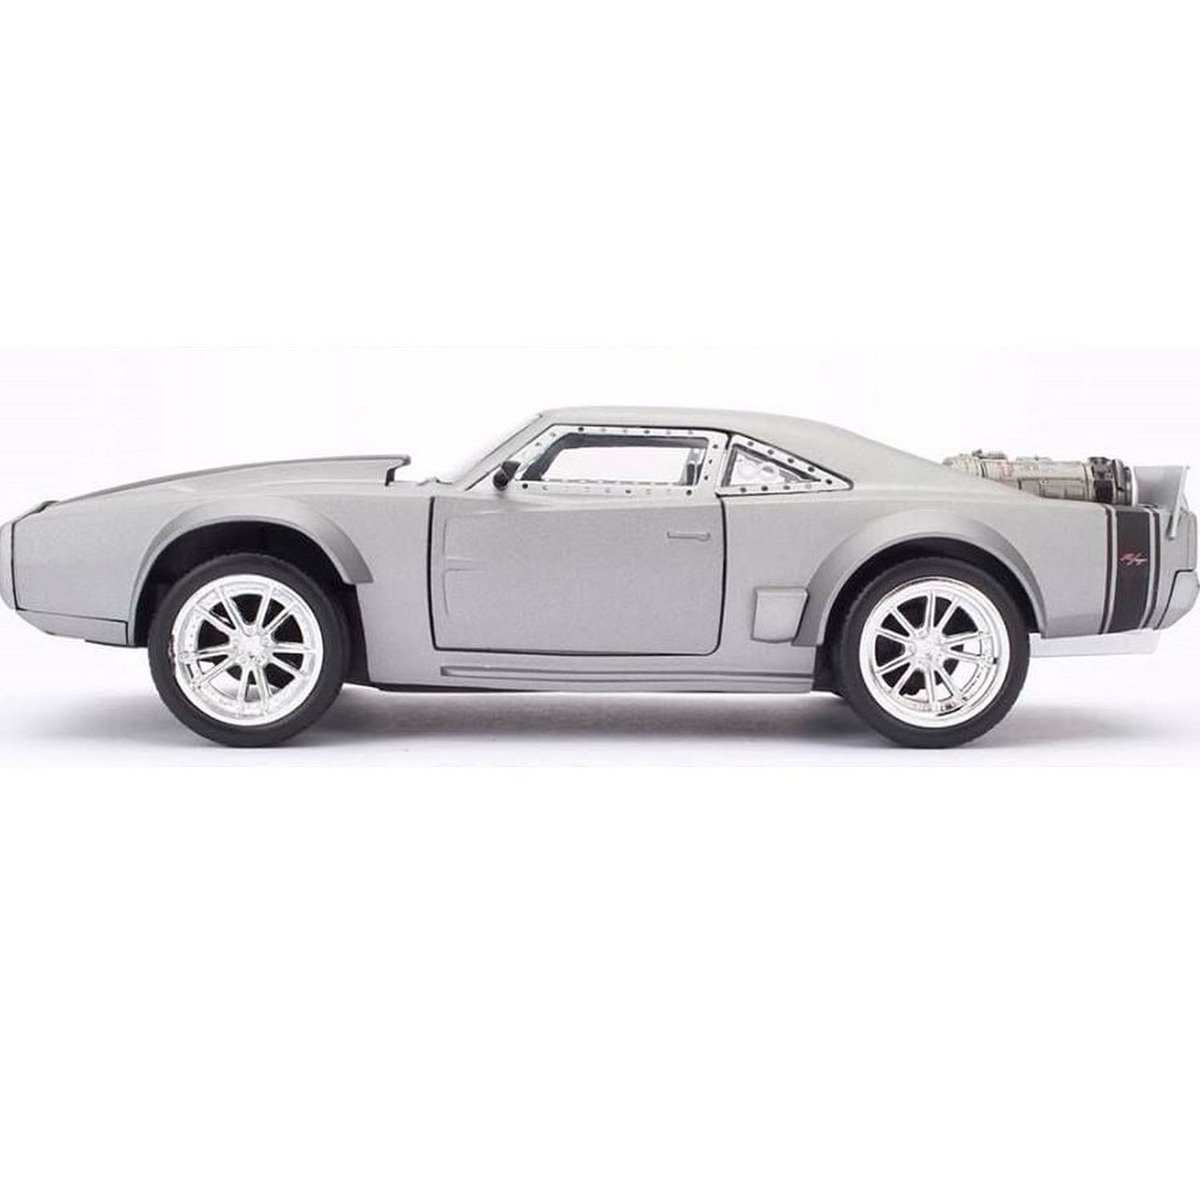 Fast & Furious 8 Die Cast Ice Charger Scale 1:32 98299